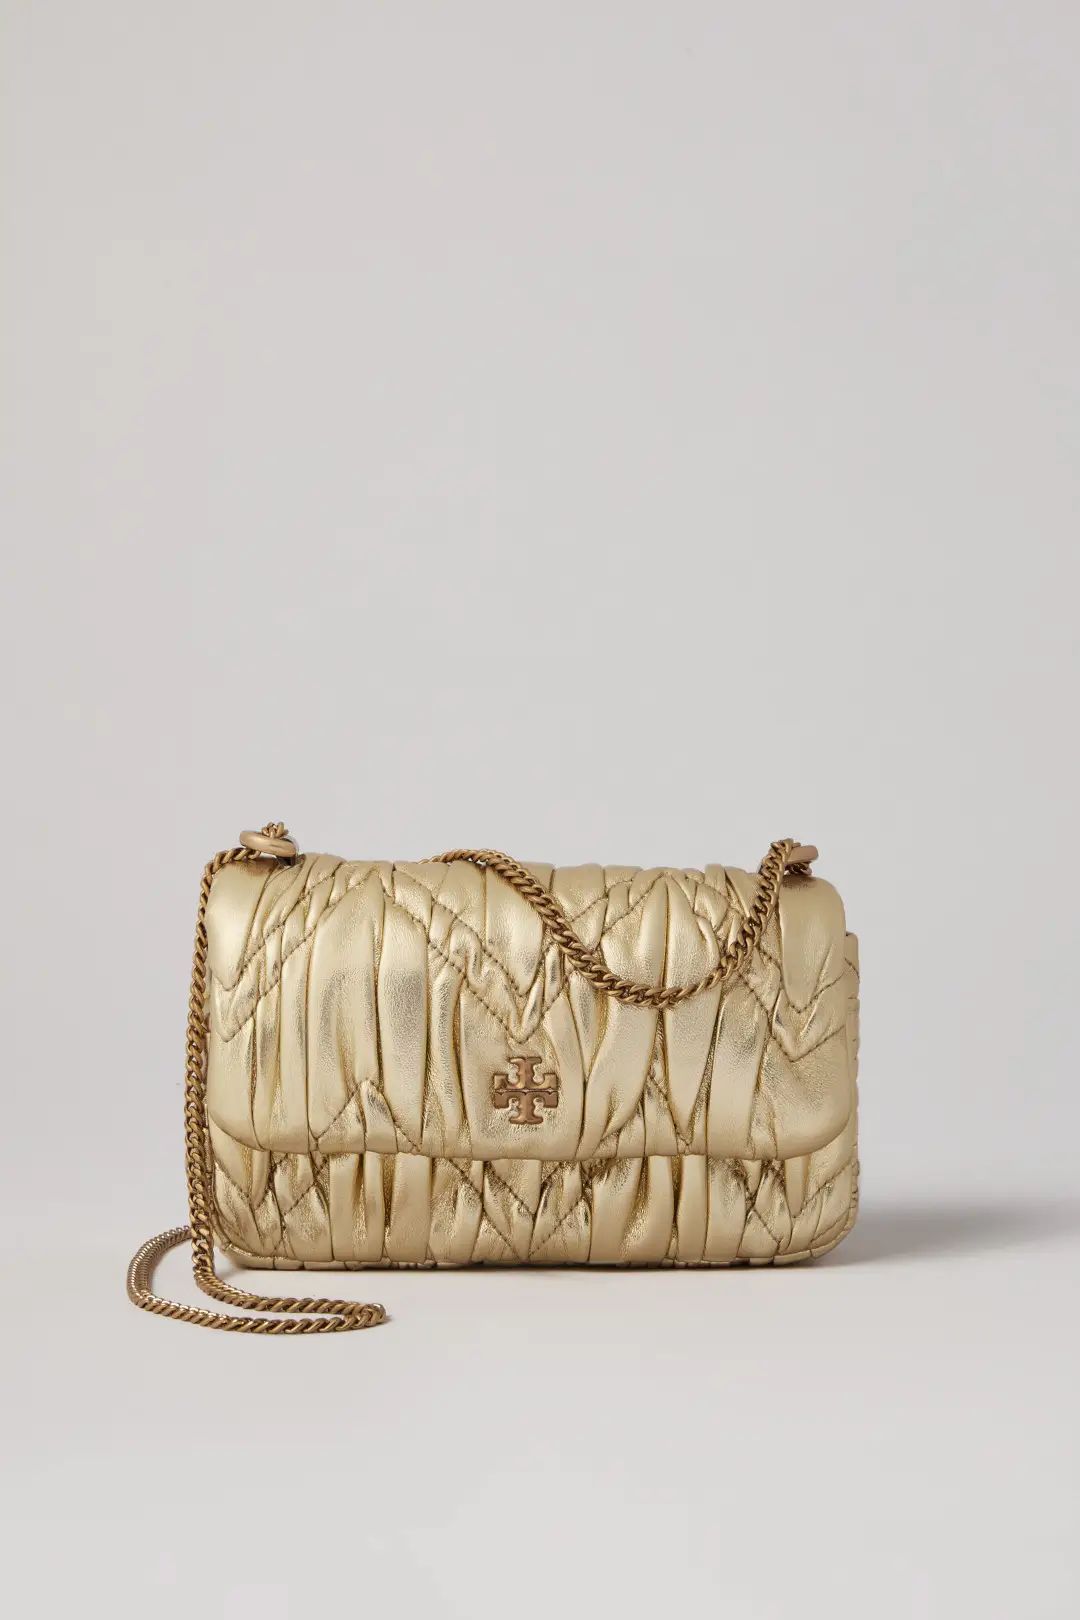 Tory Burch Accessories | Rent the Runway